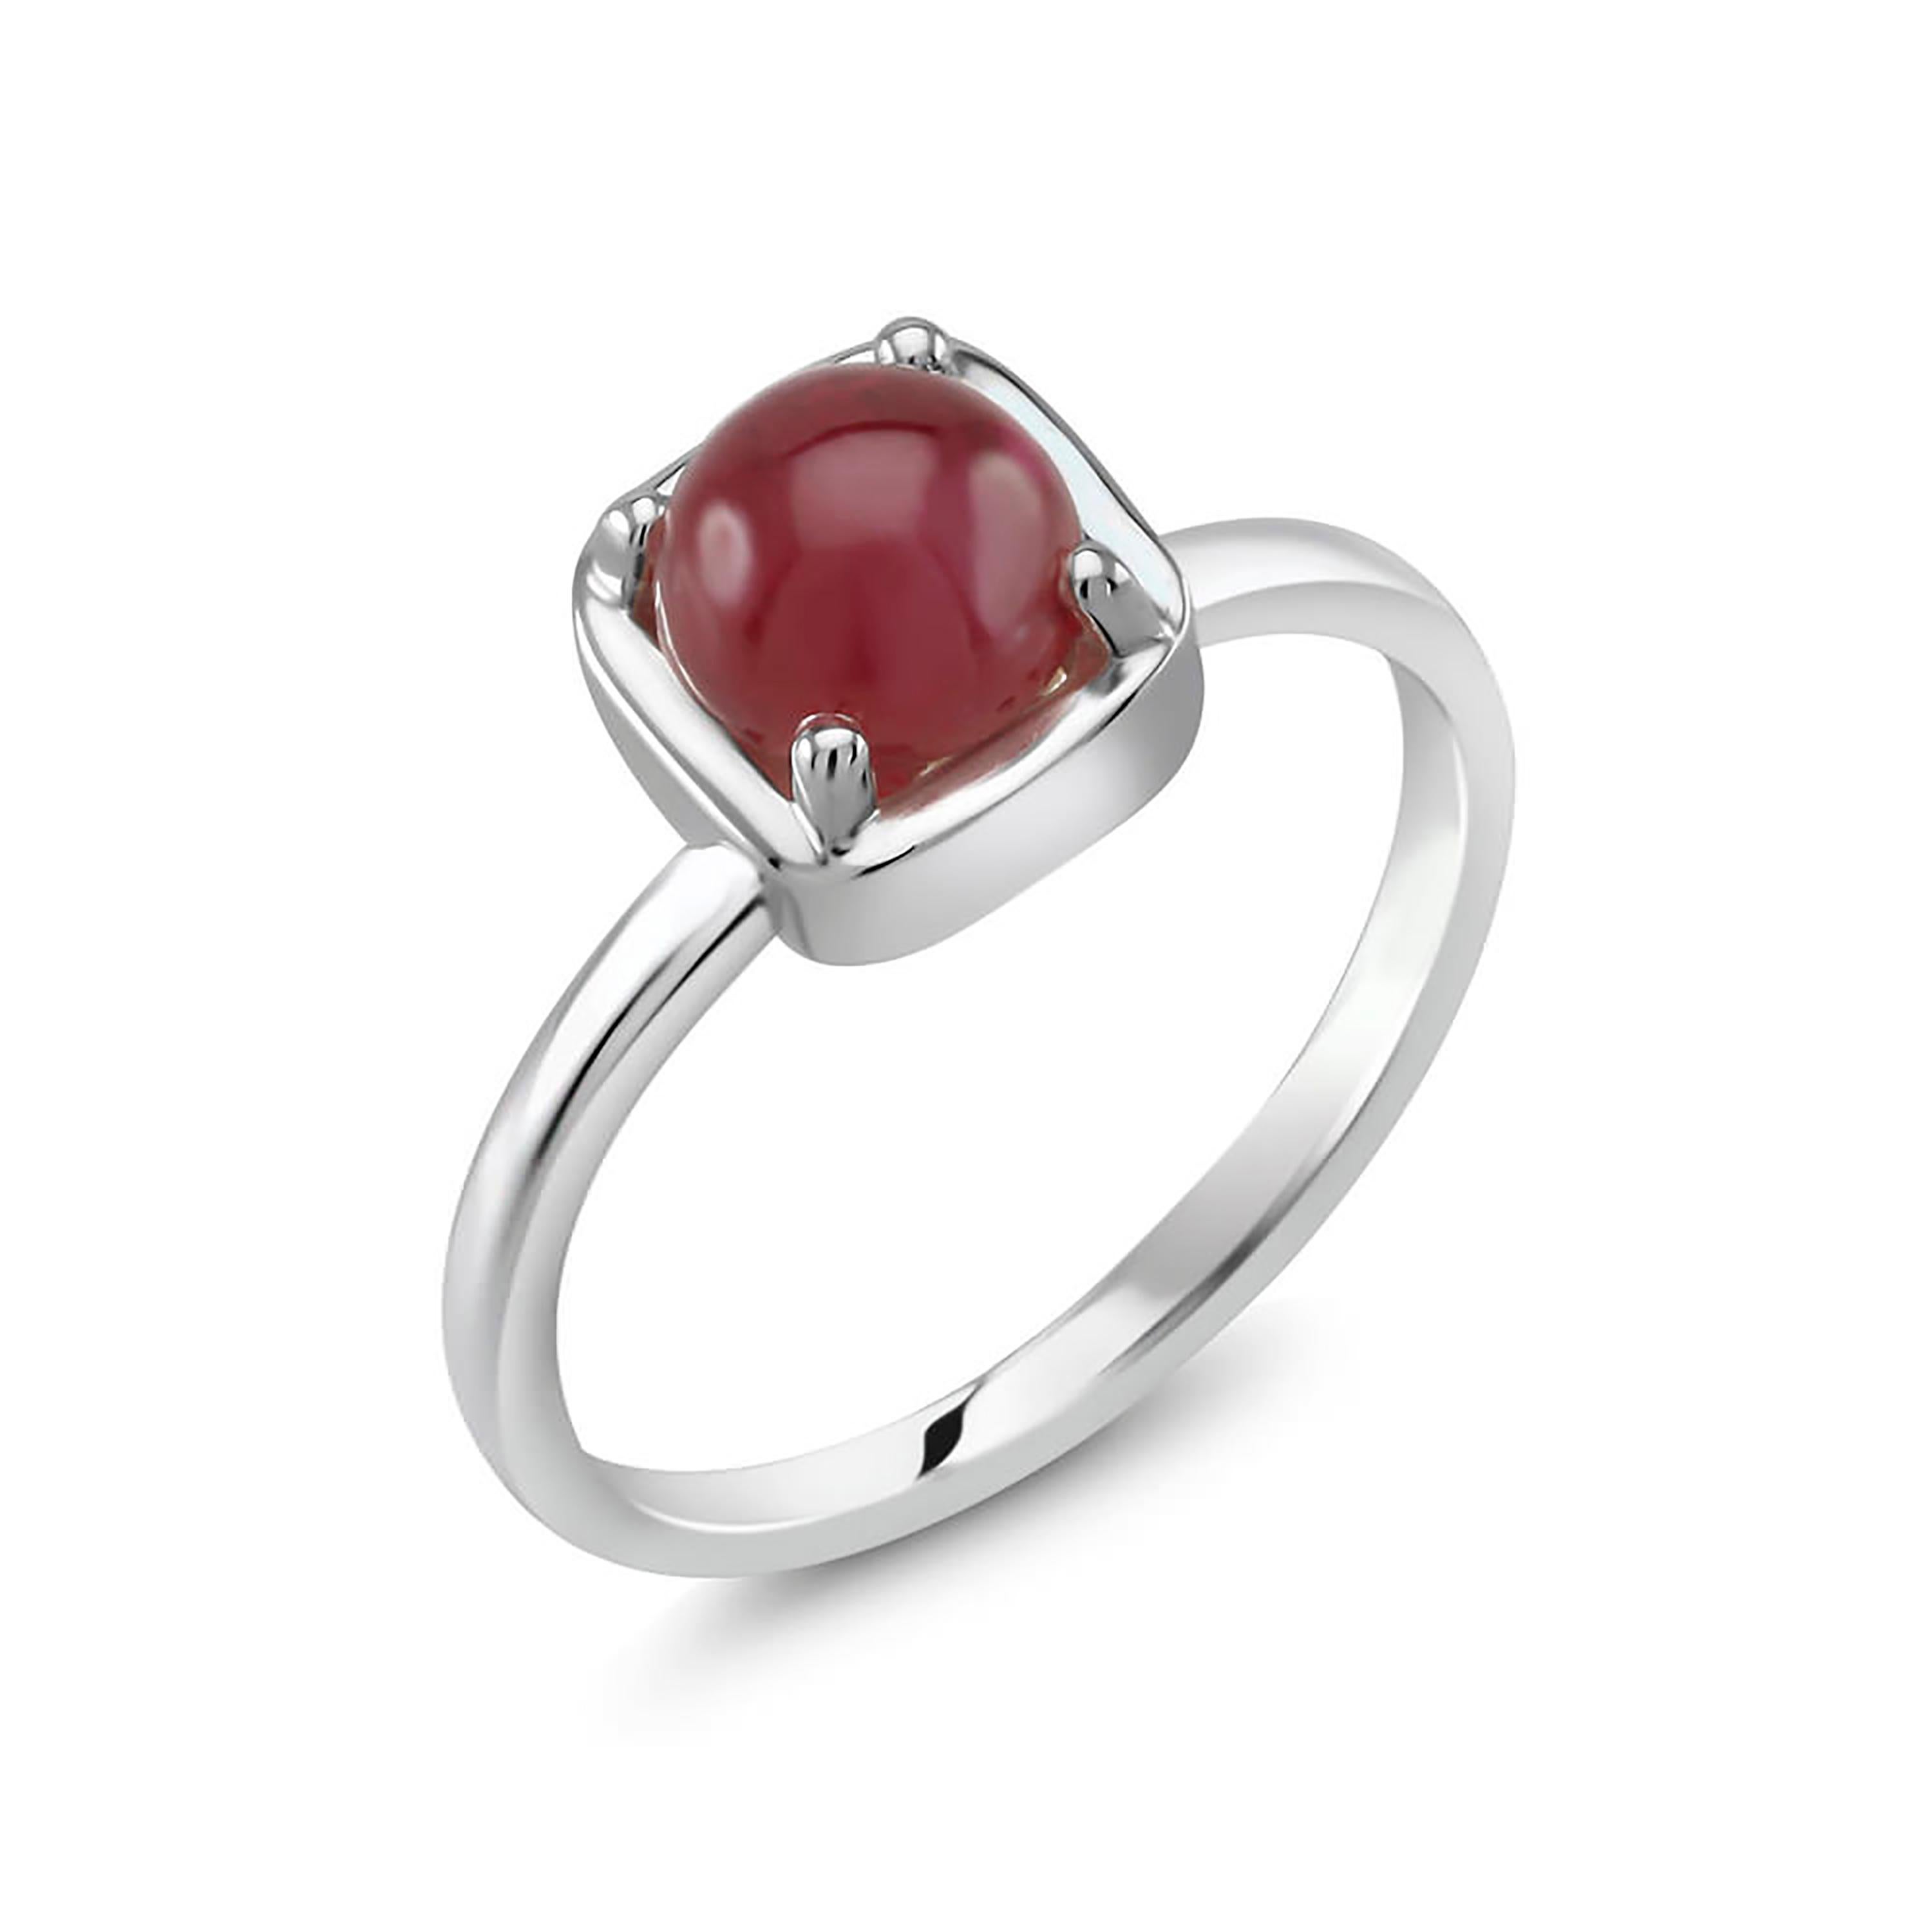 Contemporary Cabochon Ruby Solitaire Sterling Silver Ring White Gold Plate